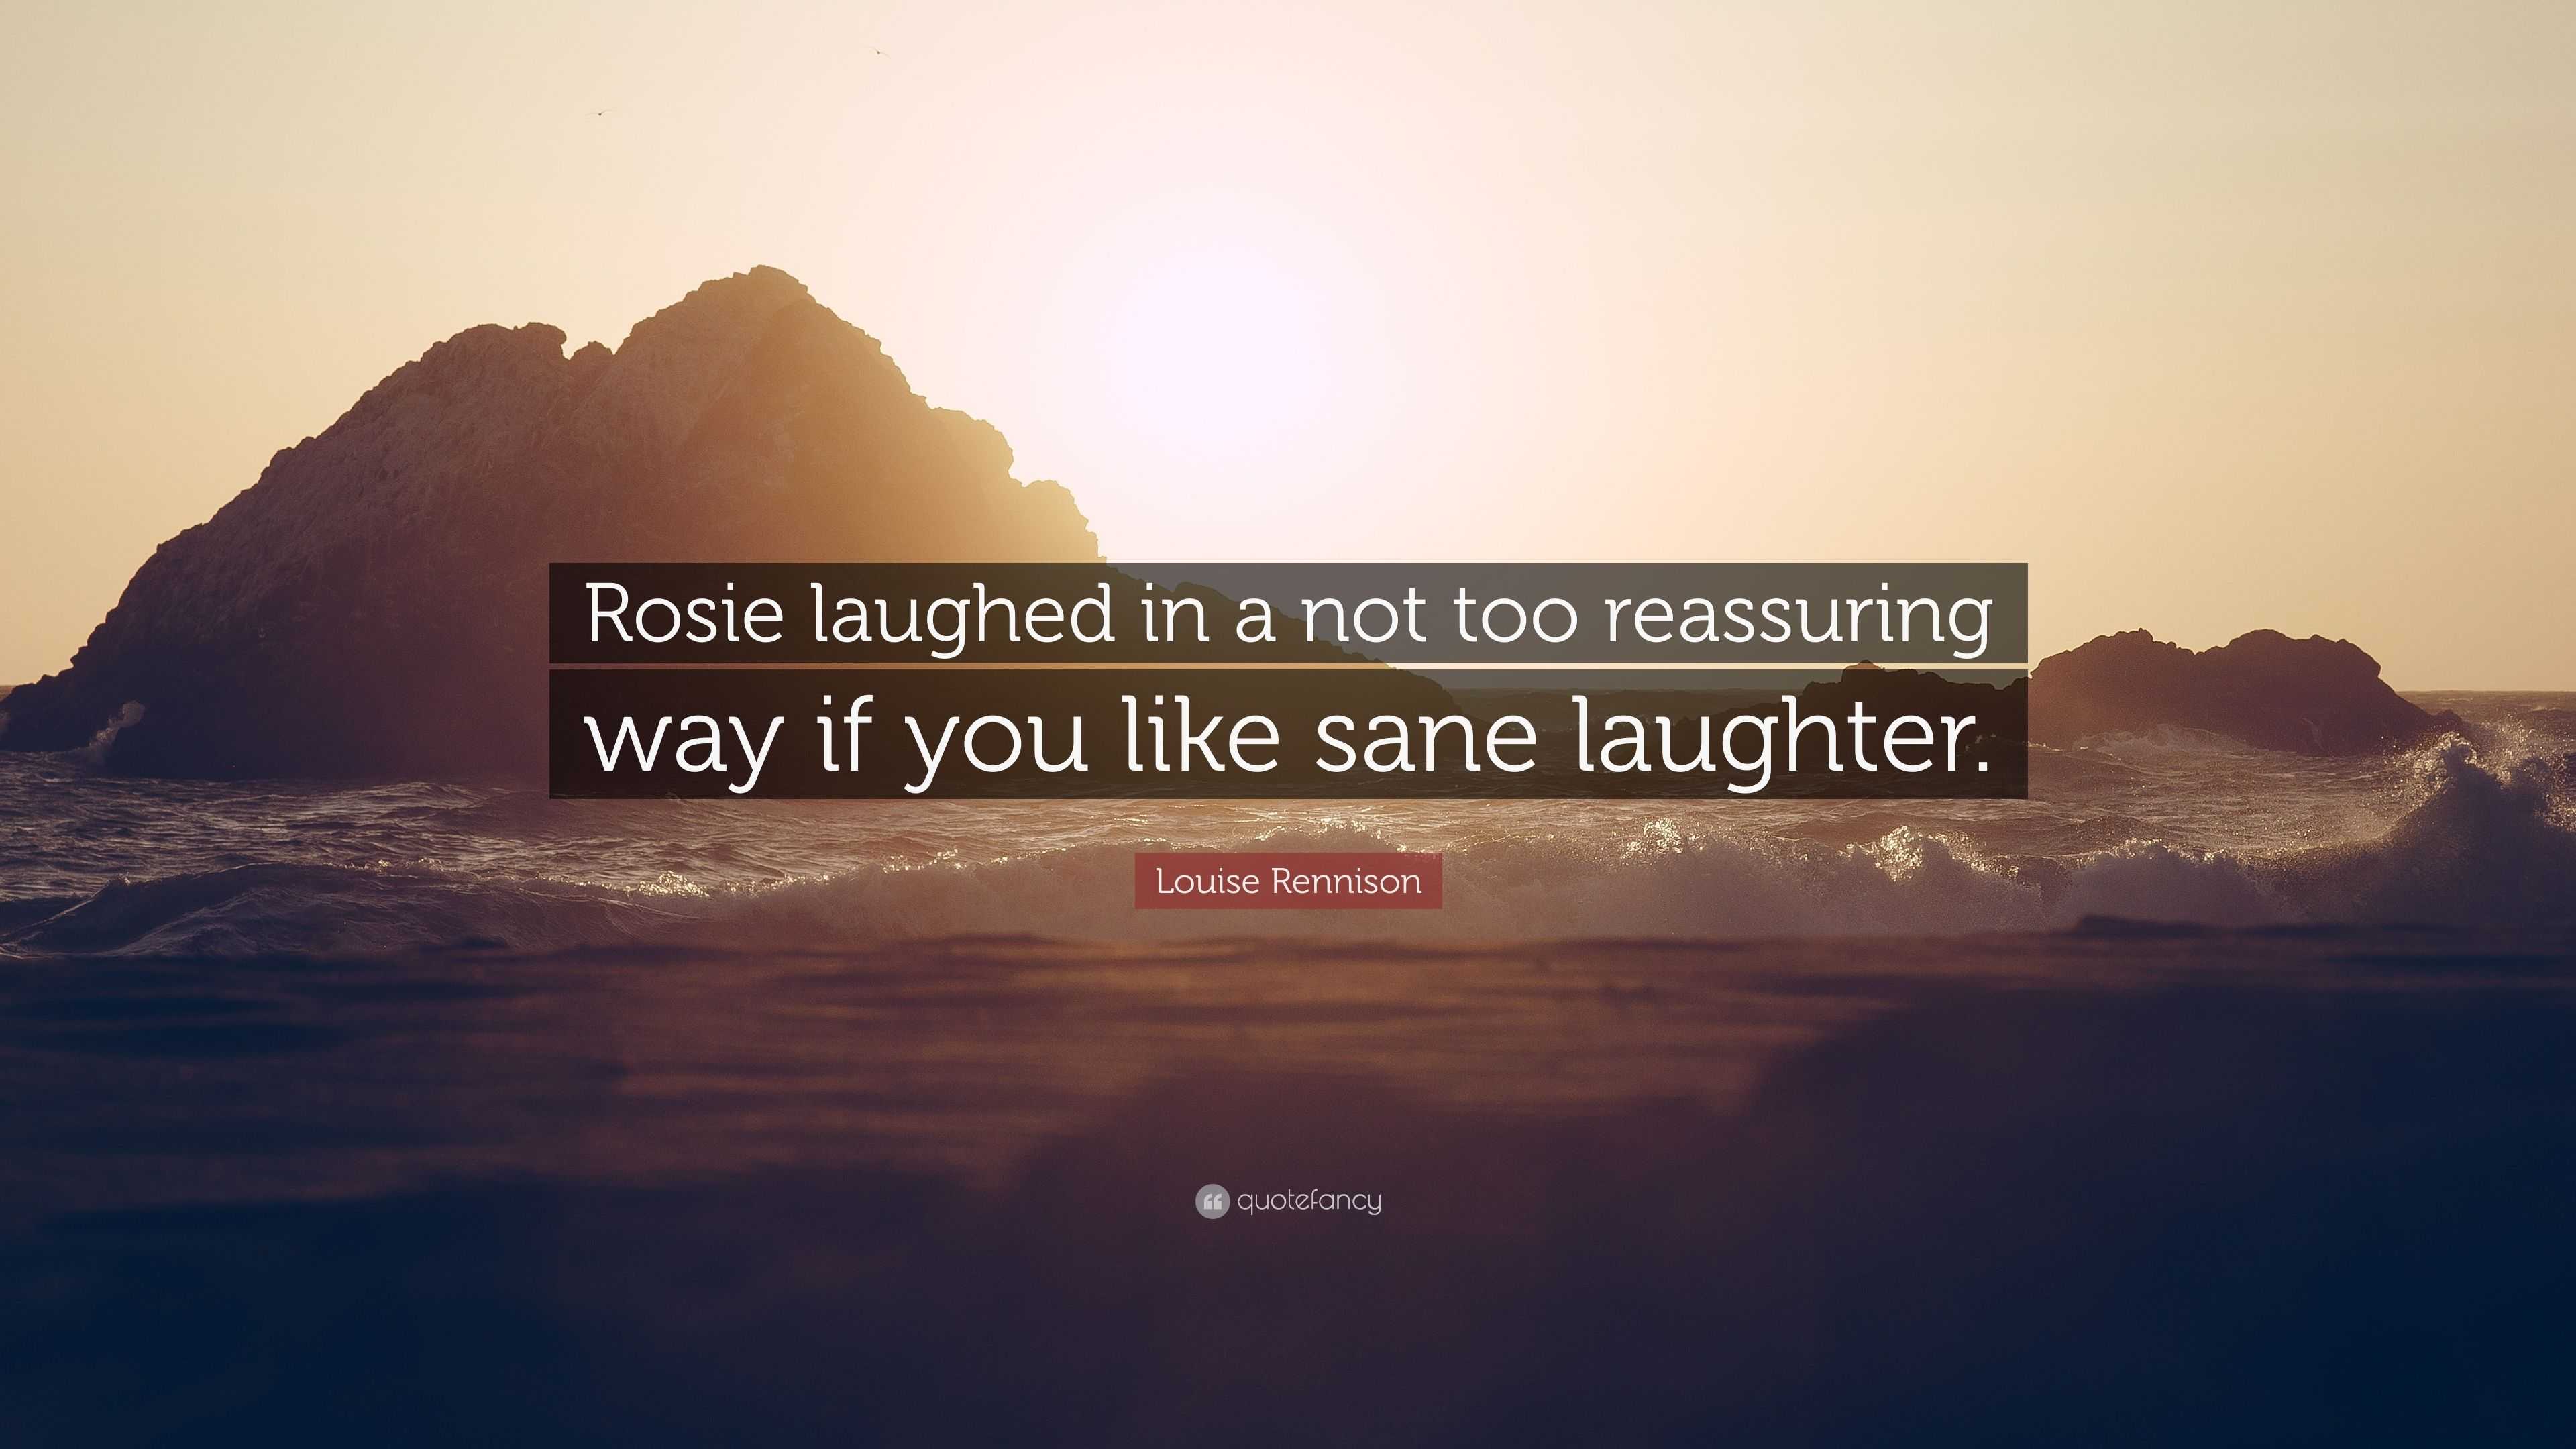 Louise Rennison Quote Rosie Laughed In A Not Too Reassuring Way If You Like Sane Laughter